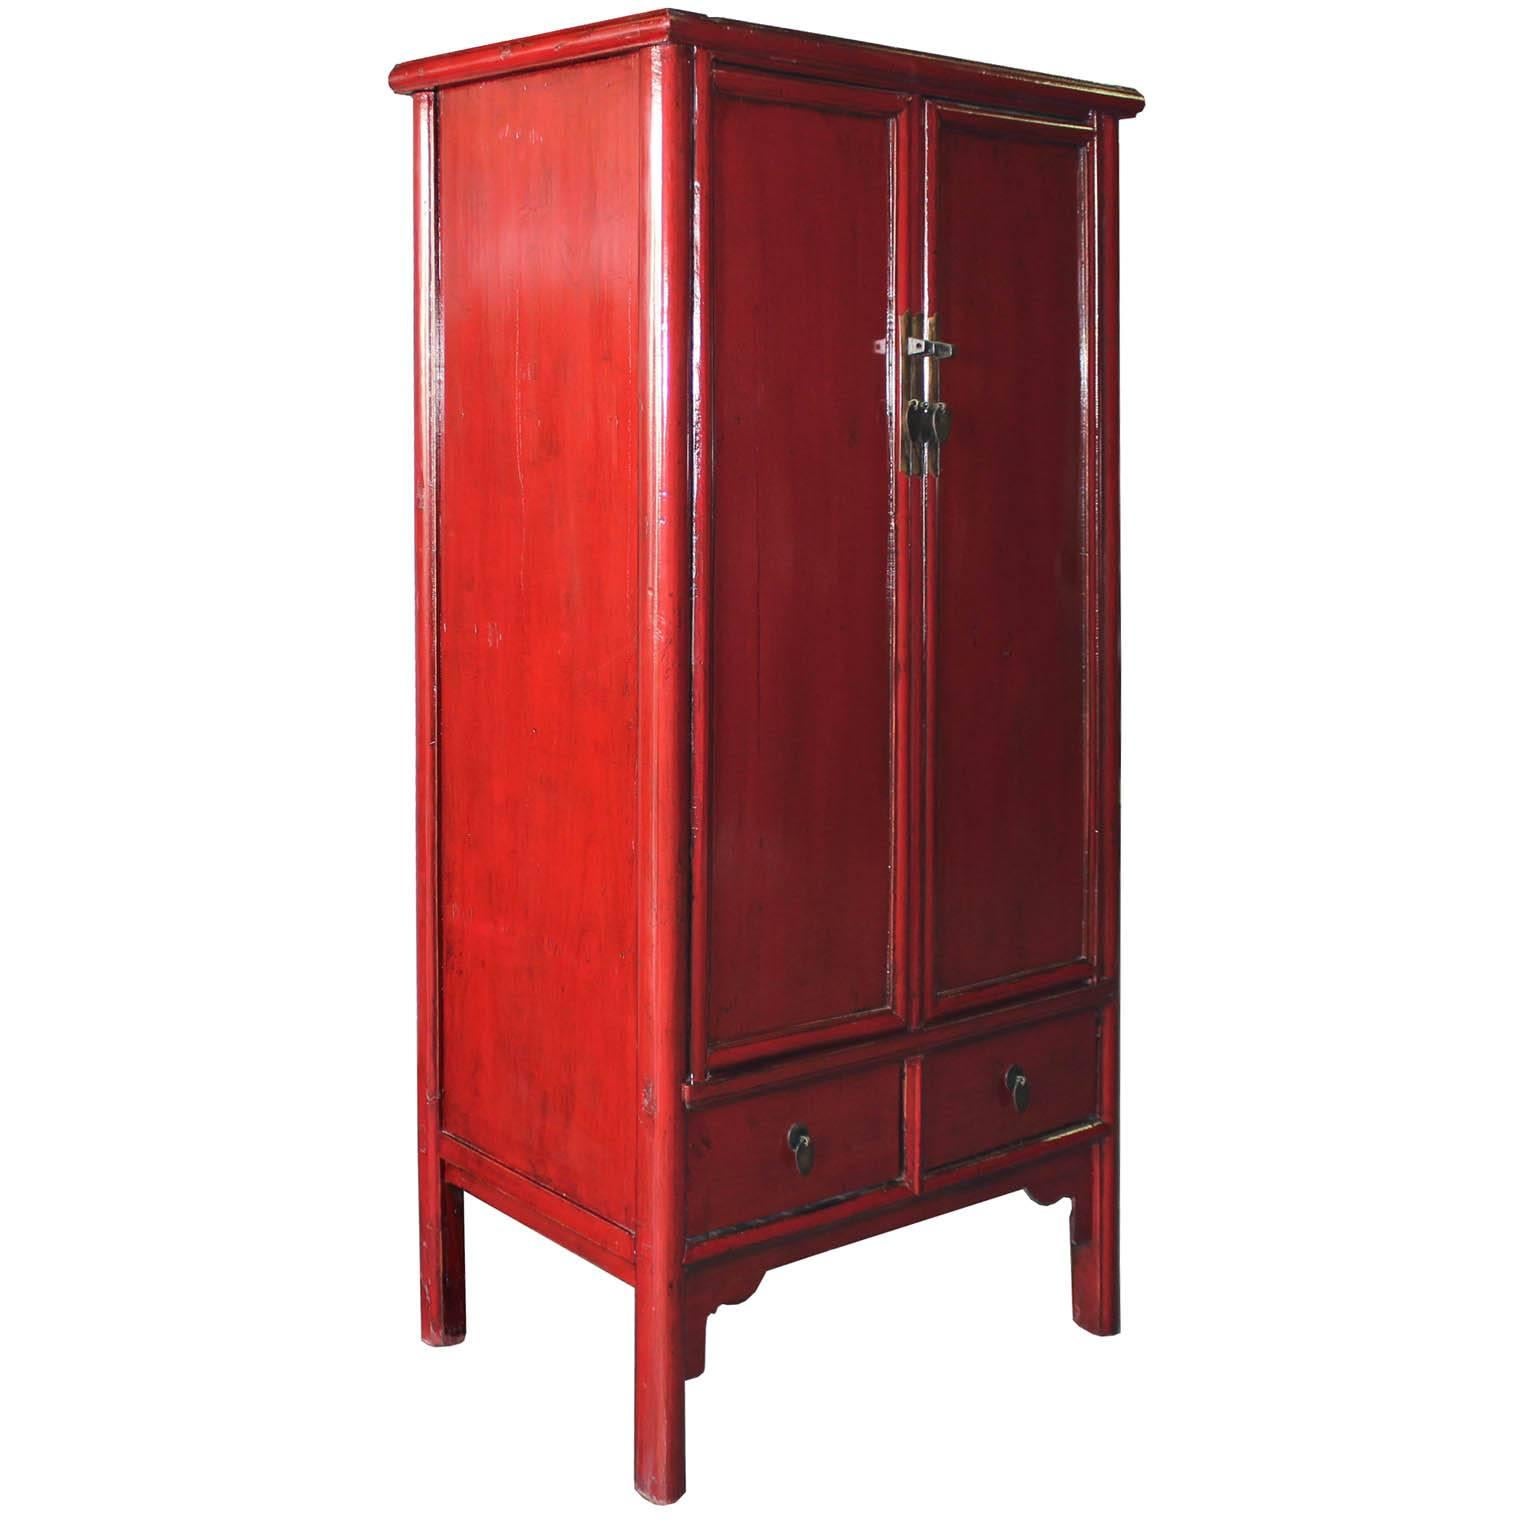 Chinese red lacquer wardrobe chest with clean rounded lines and exposed wood edges can be used to store clothing or to house a flat screen TV. Four drawers, two behind the doors. Middle vertical bar removes for easy interior access. Place this red